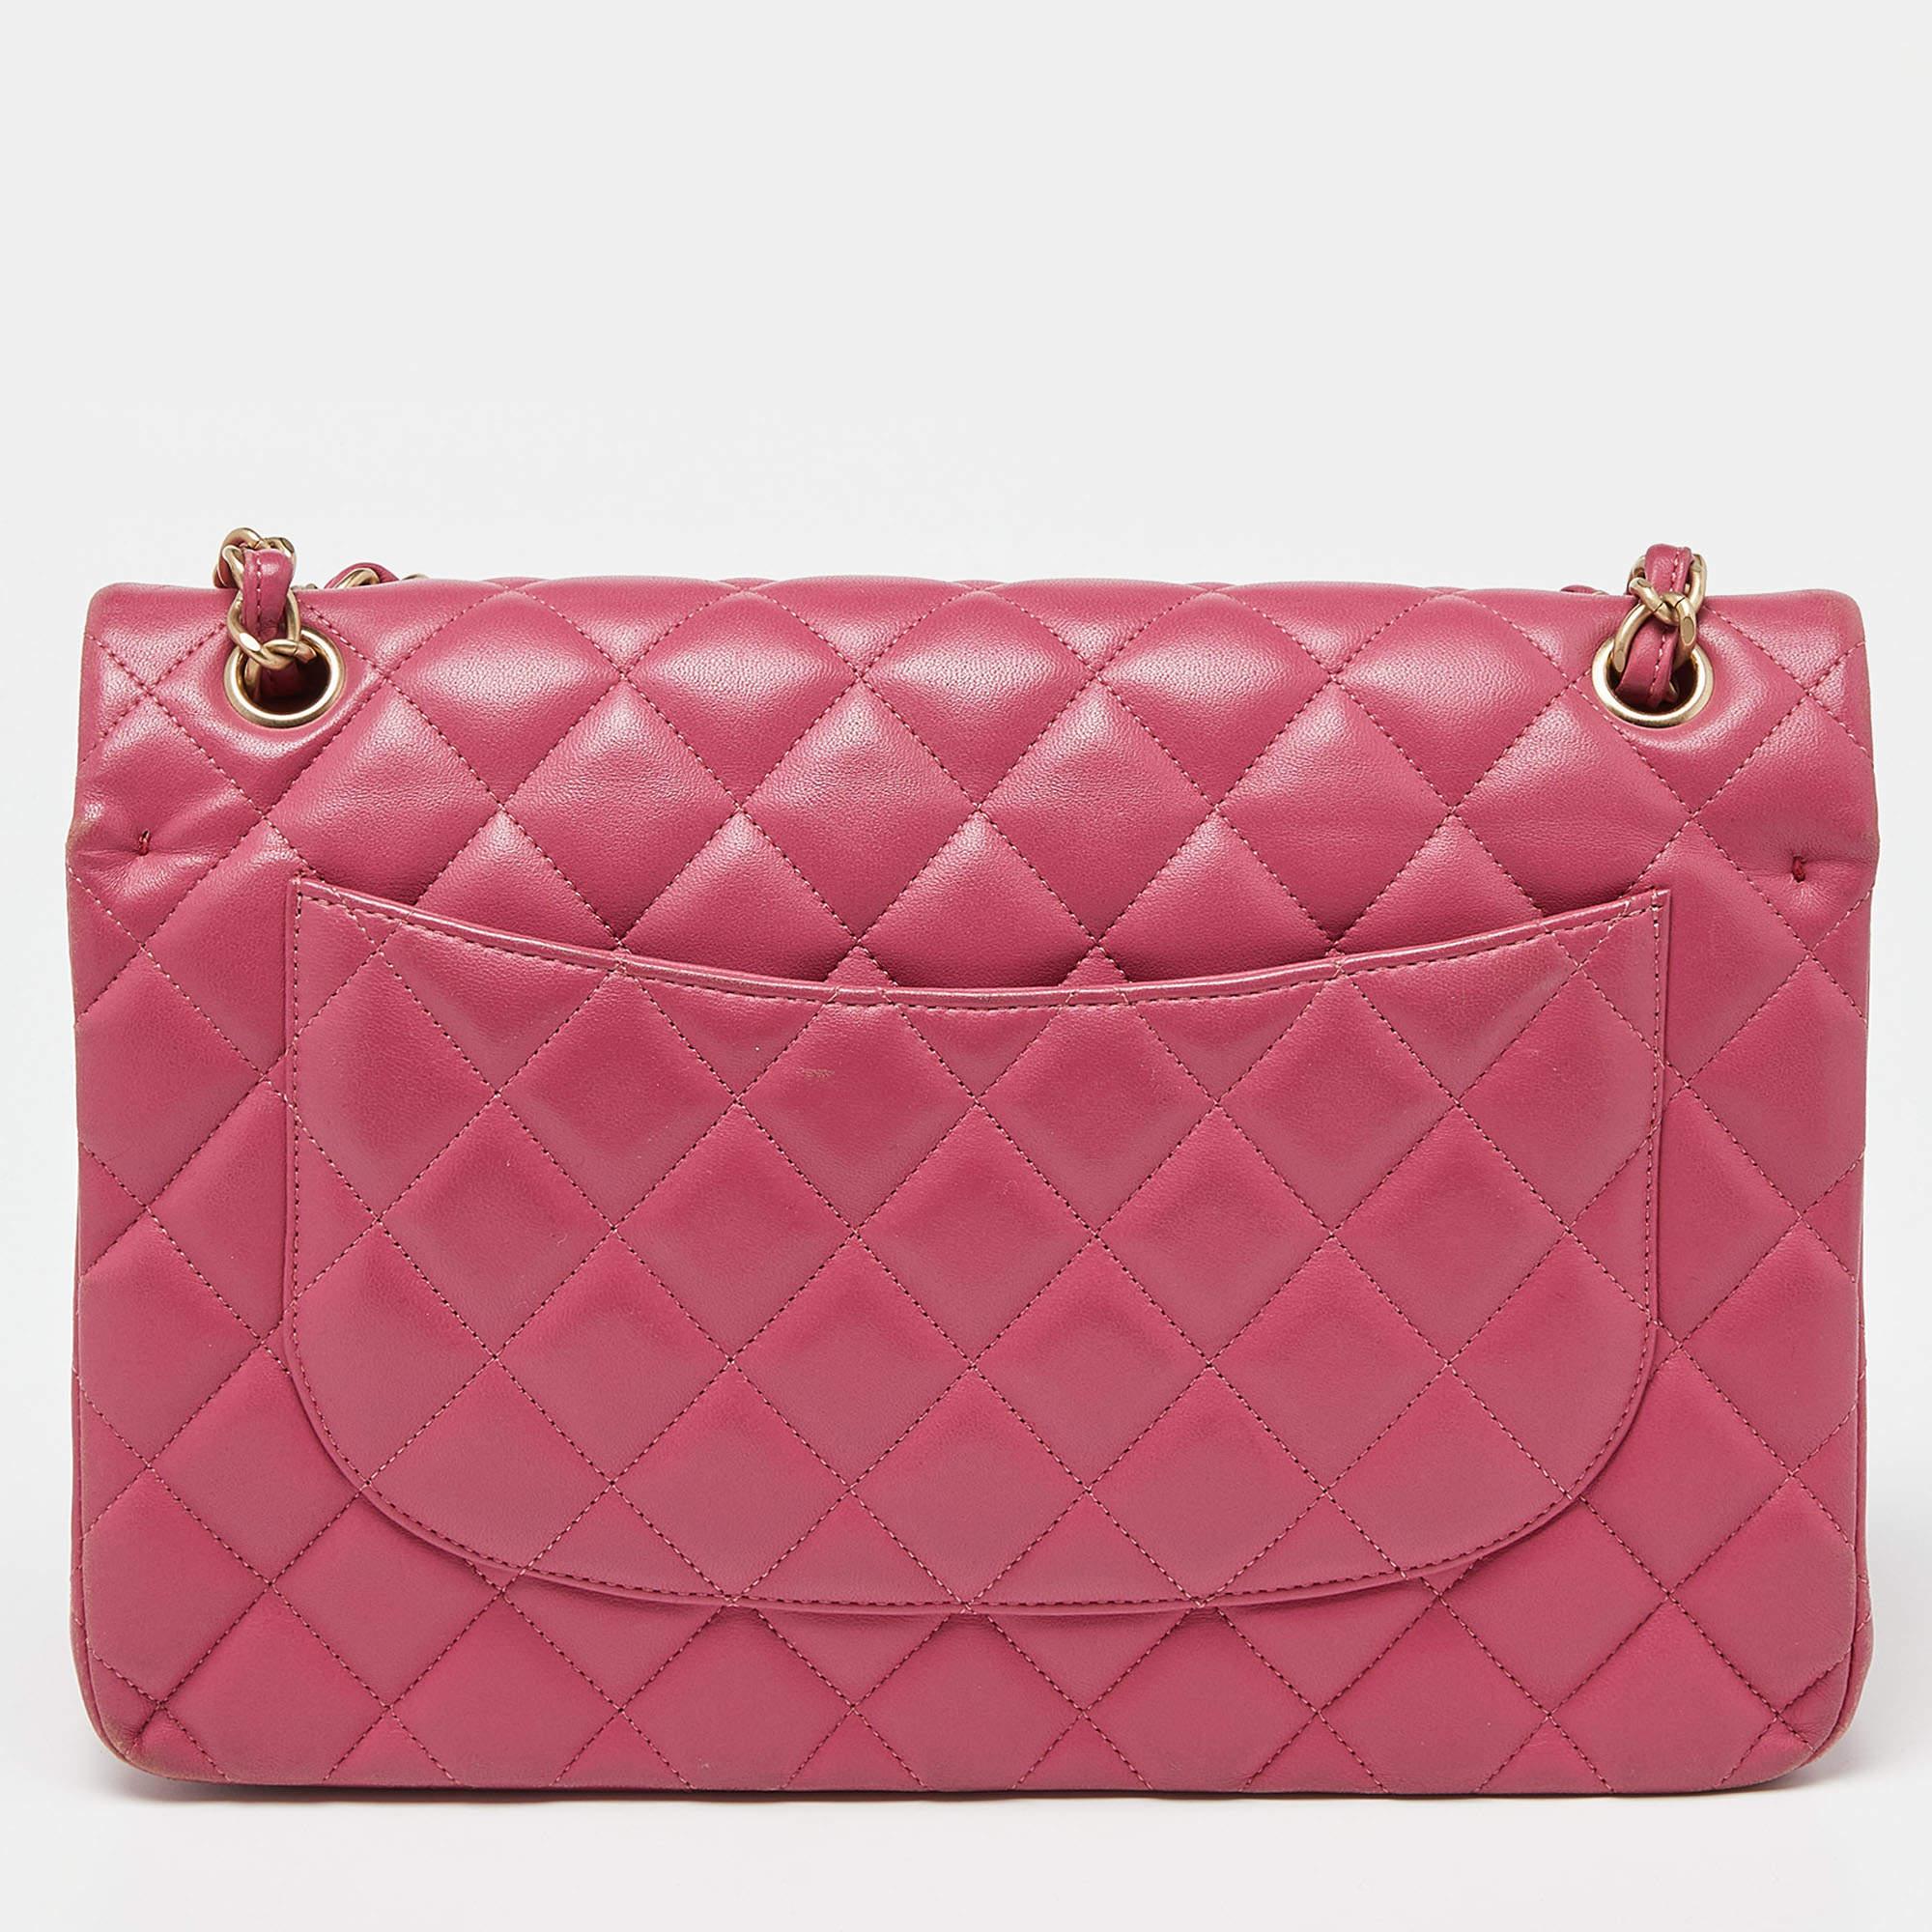 Chanel Pink Quilted Leather Jumbo Classic Double Flap Bag 2